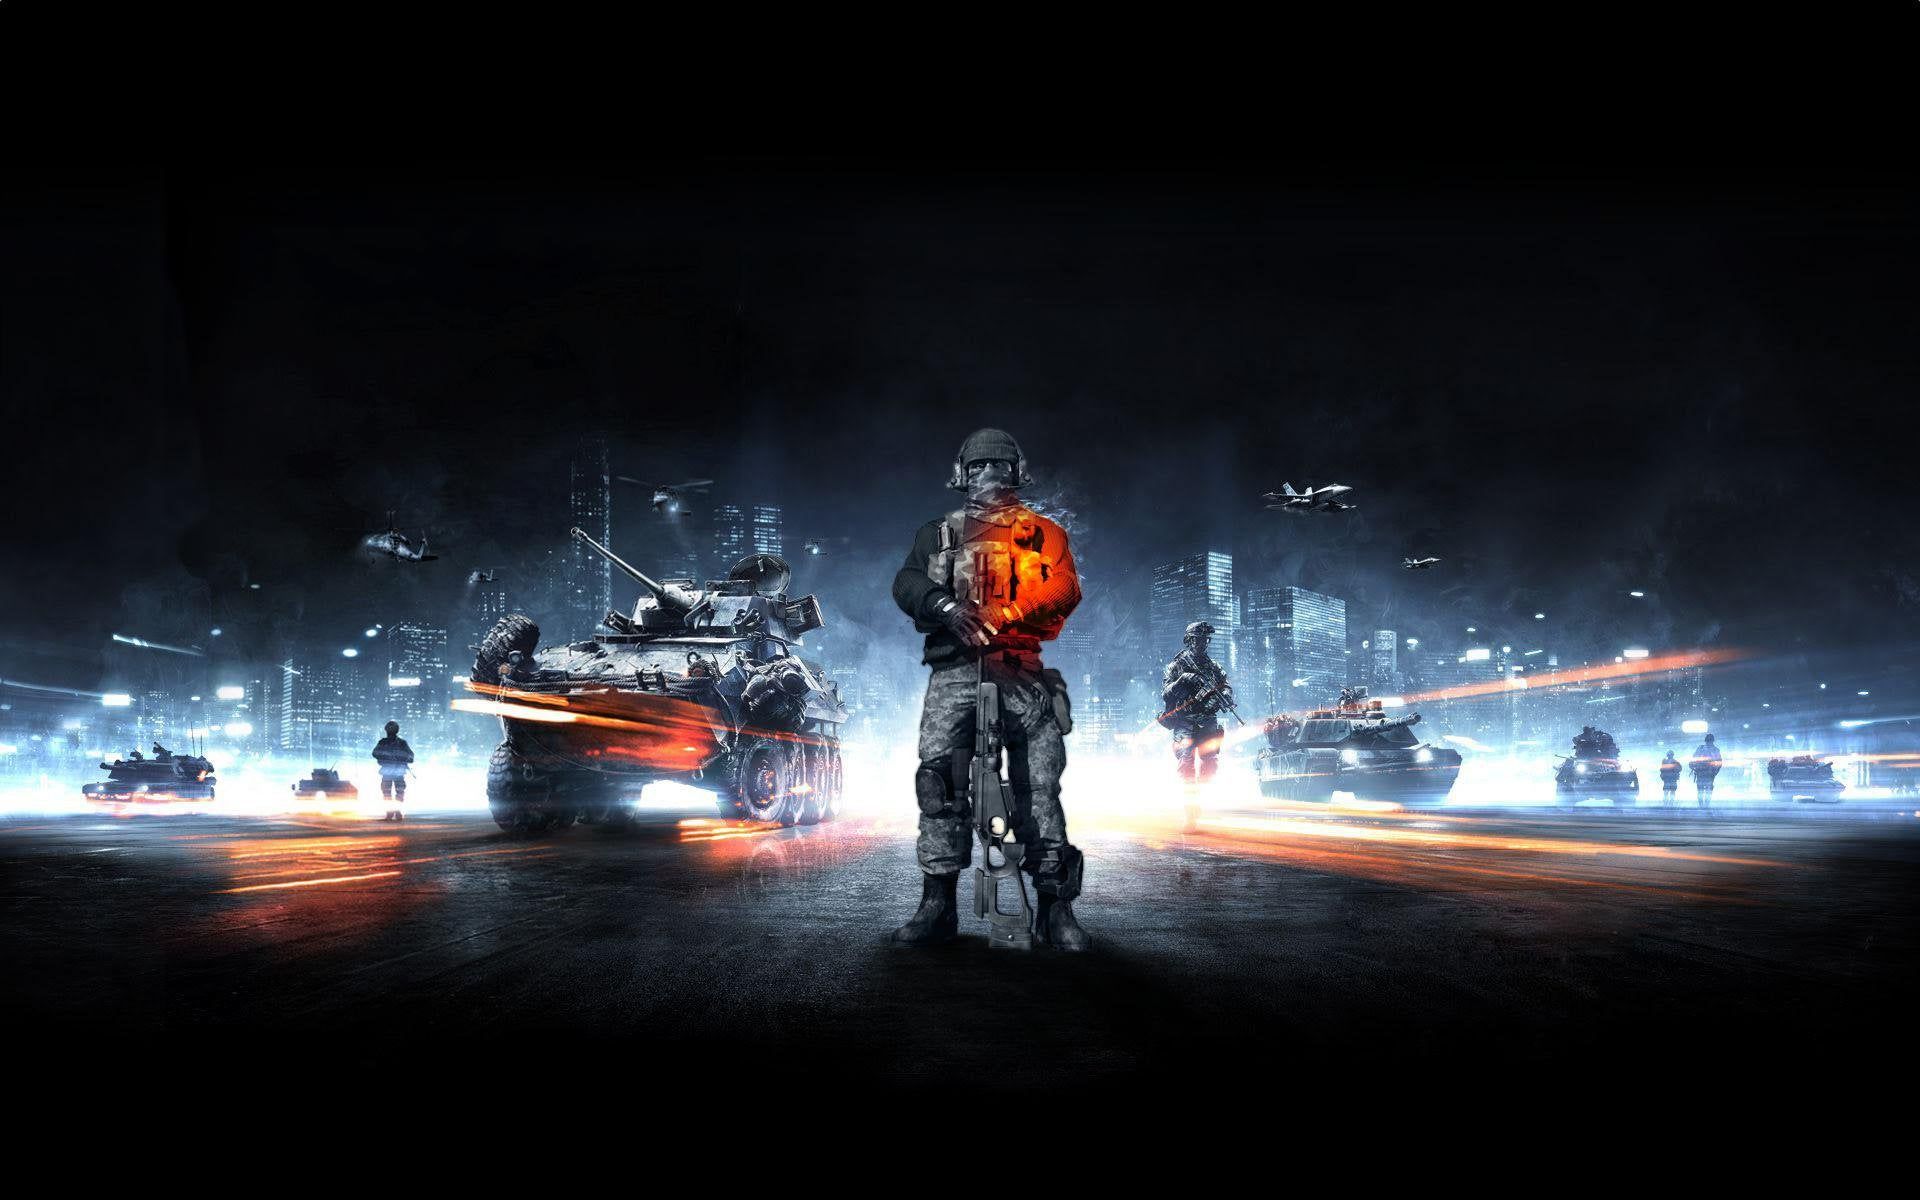 My attempt at making a decent BF3 wallpaper